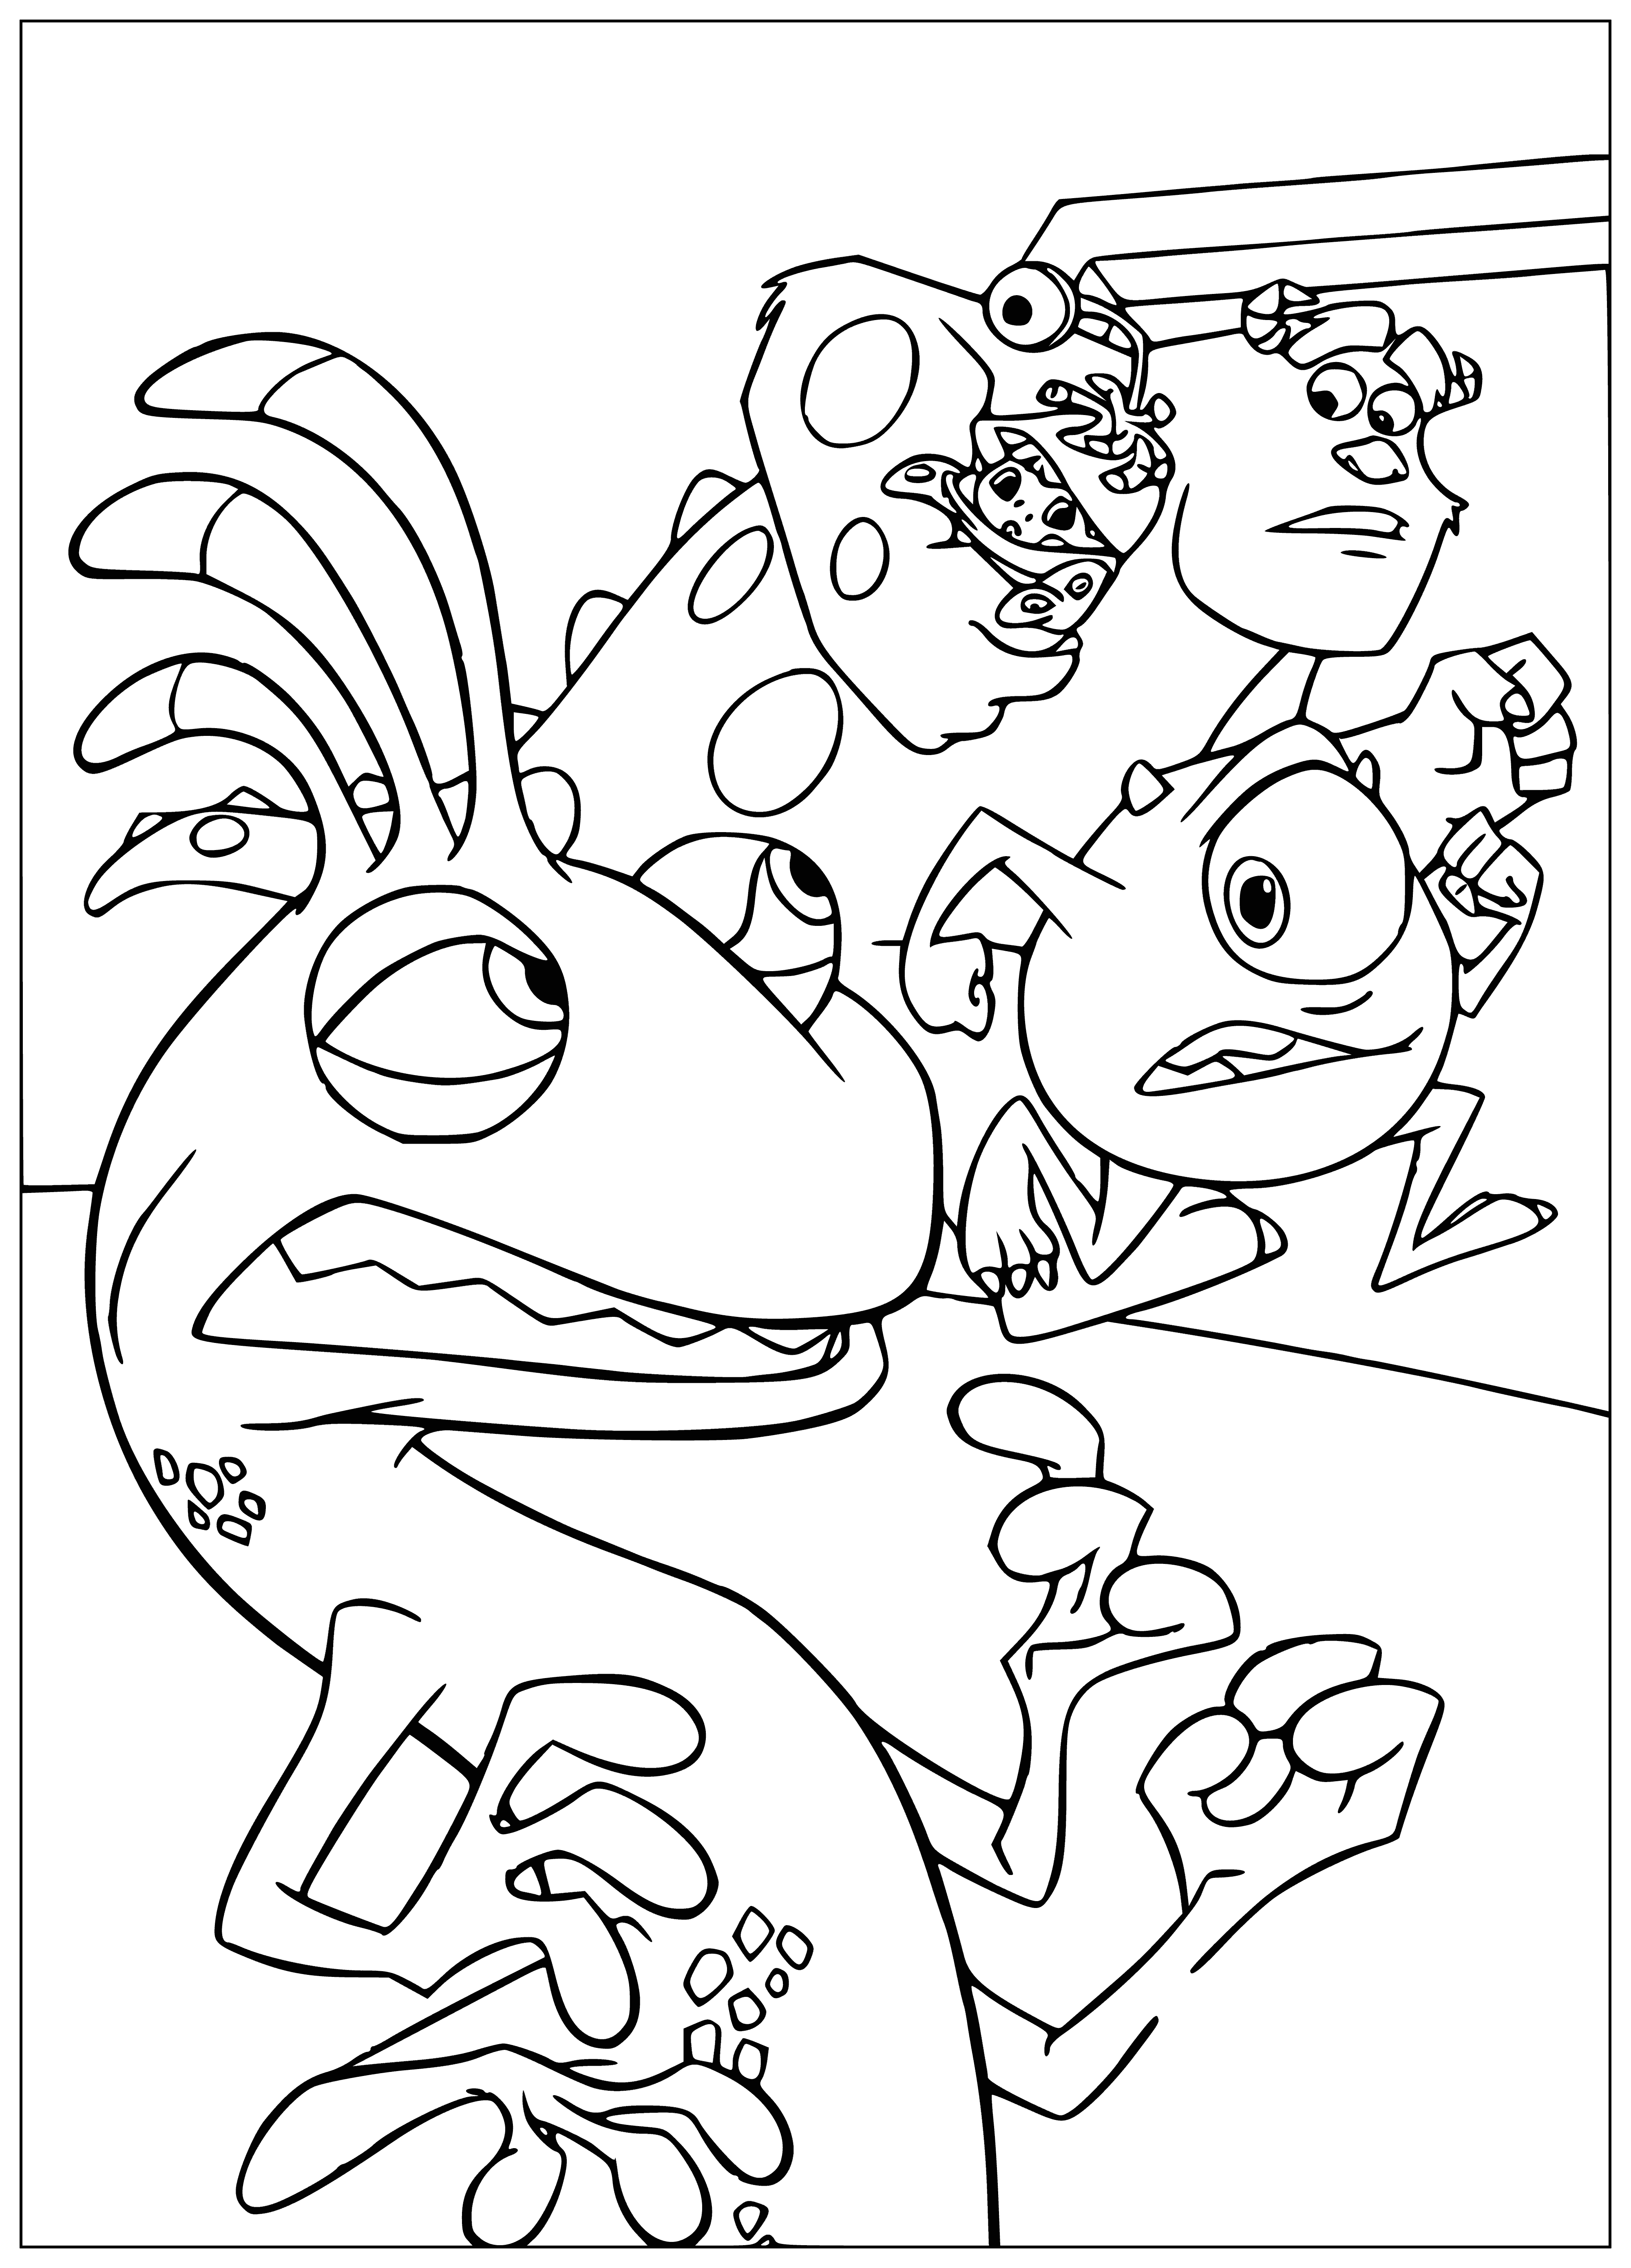 coloring page: Sally and Mike are fleeing Randall, a big, scary monster who's after them. They're running fast and Randall looks angry.